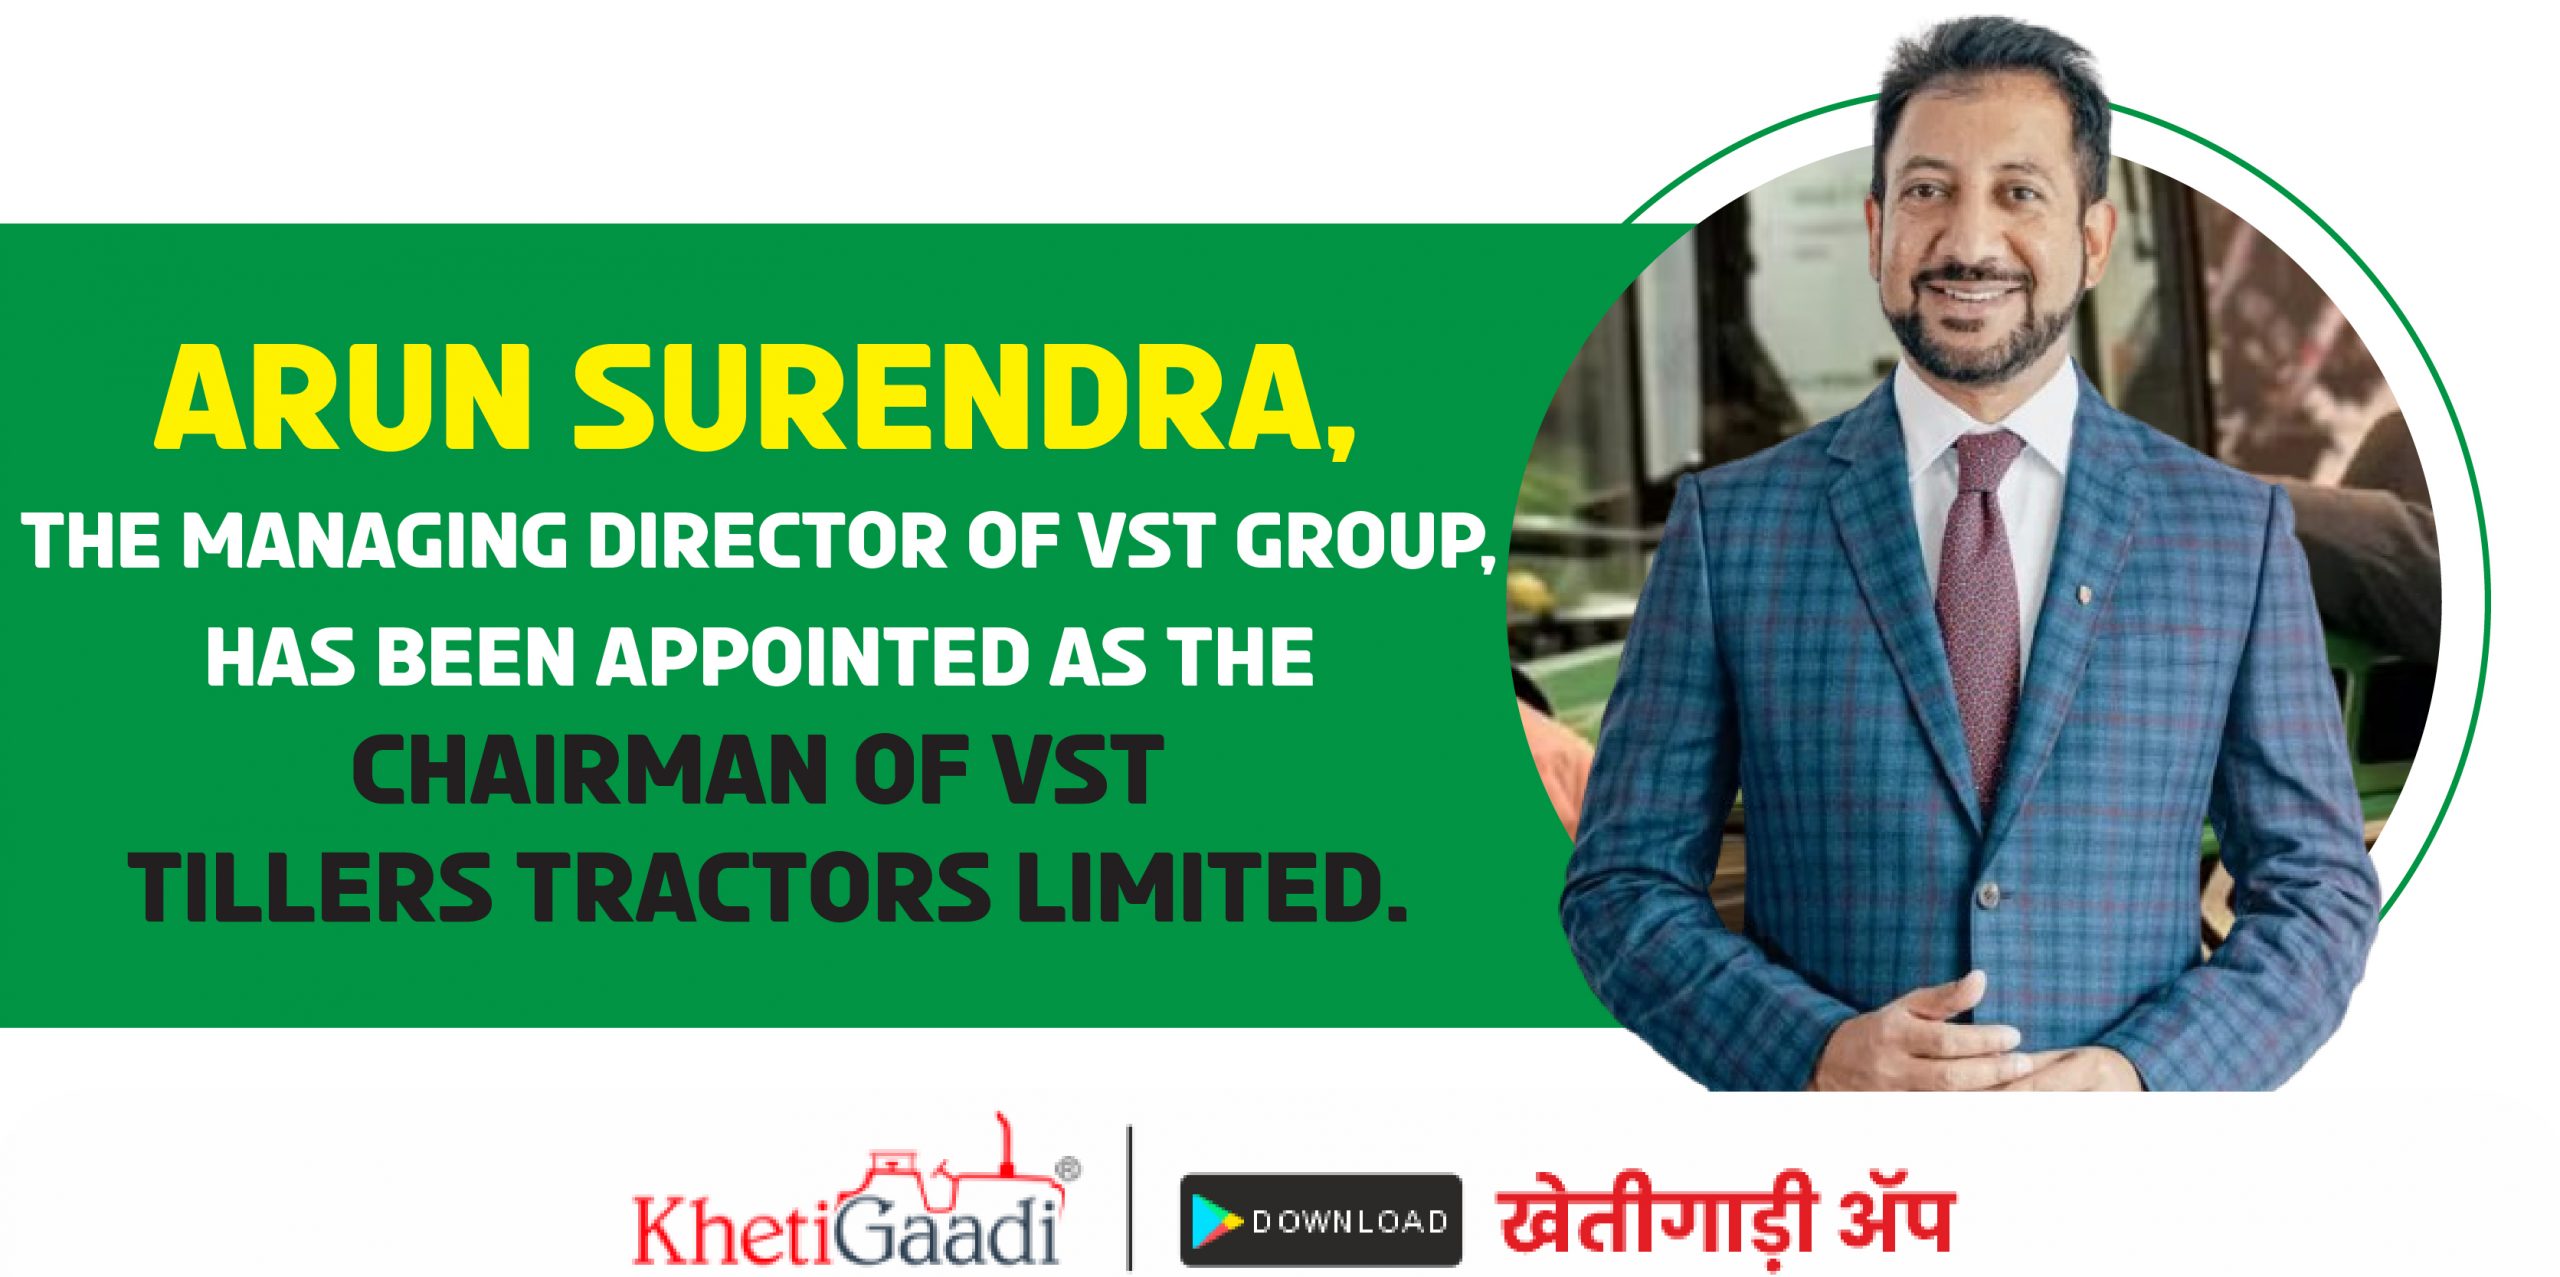 Arun Surendra, the Managing Director of VST Group, has been appointed as the Chairman of VST Tillers Tractors Ltd.